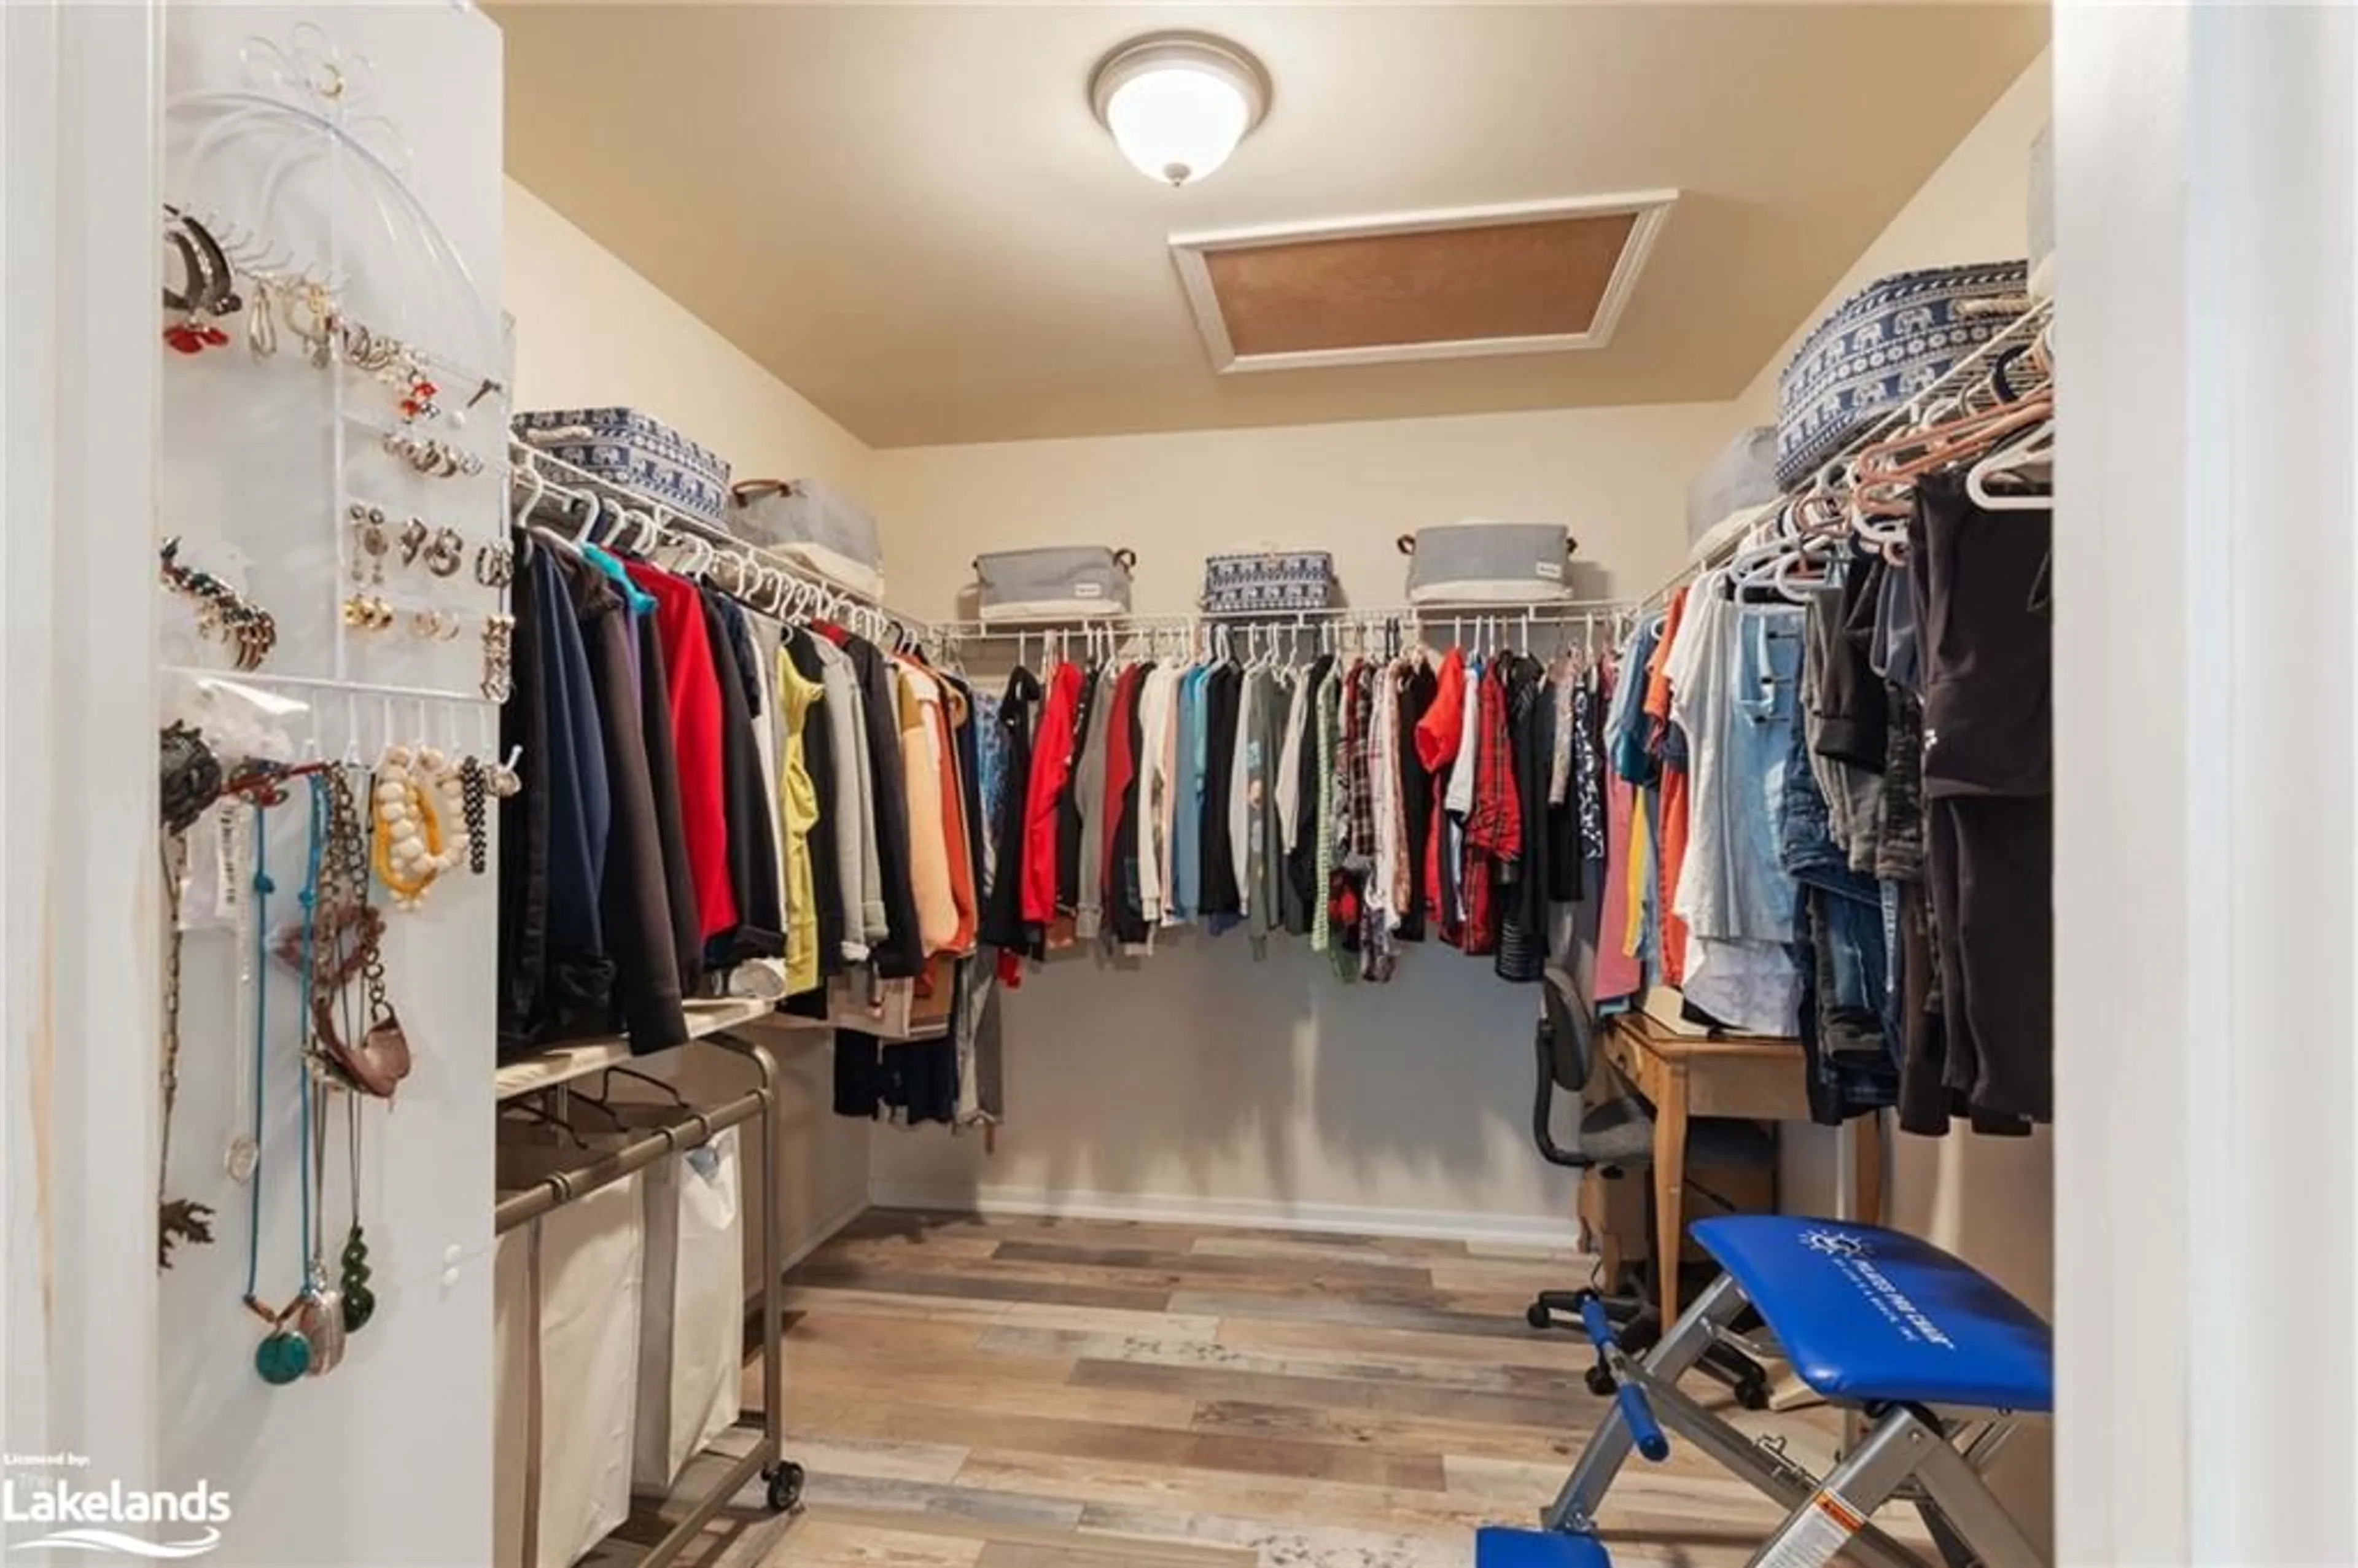 Storage room or clothes room or walk-in closet for 84 New York Ave, Wasaga Beach Ontario L9Z 3A8